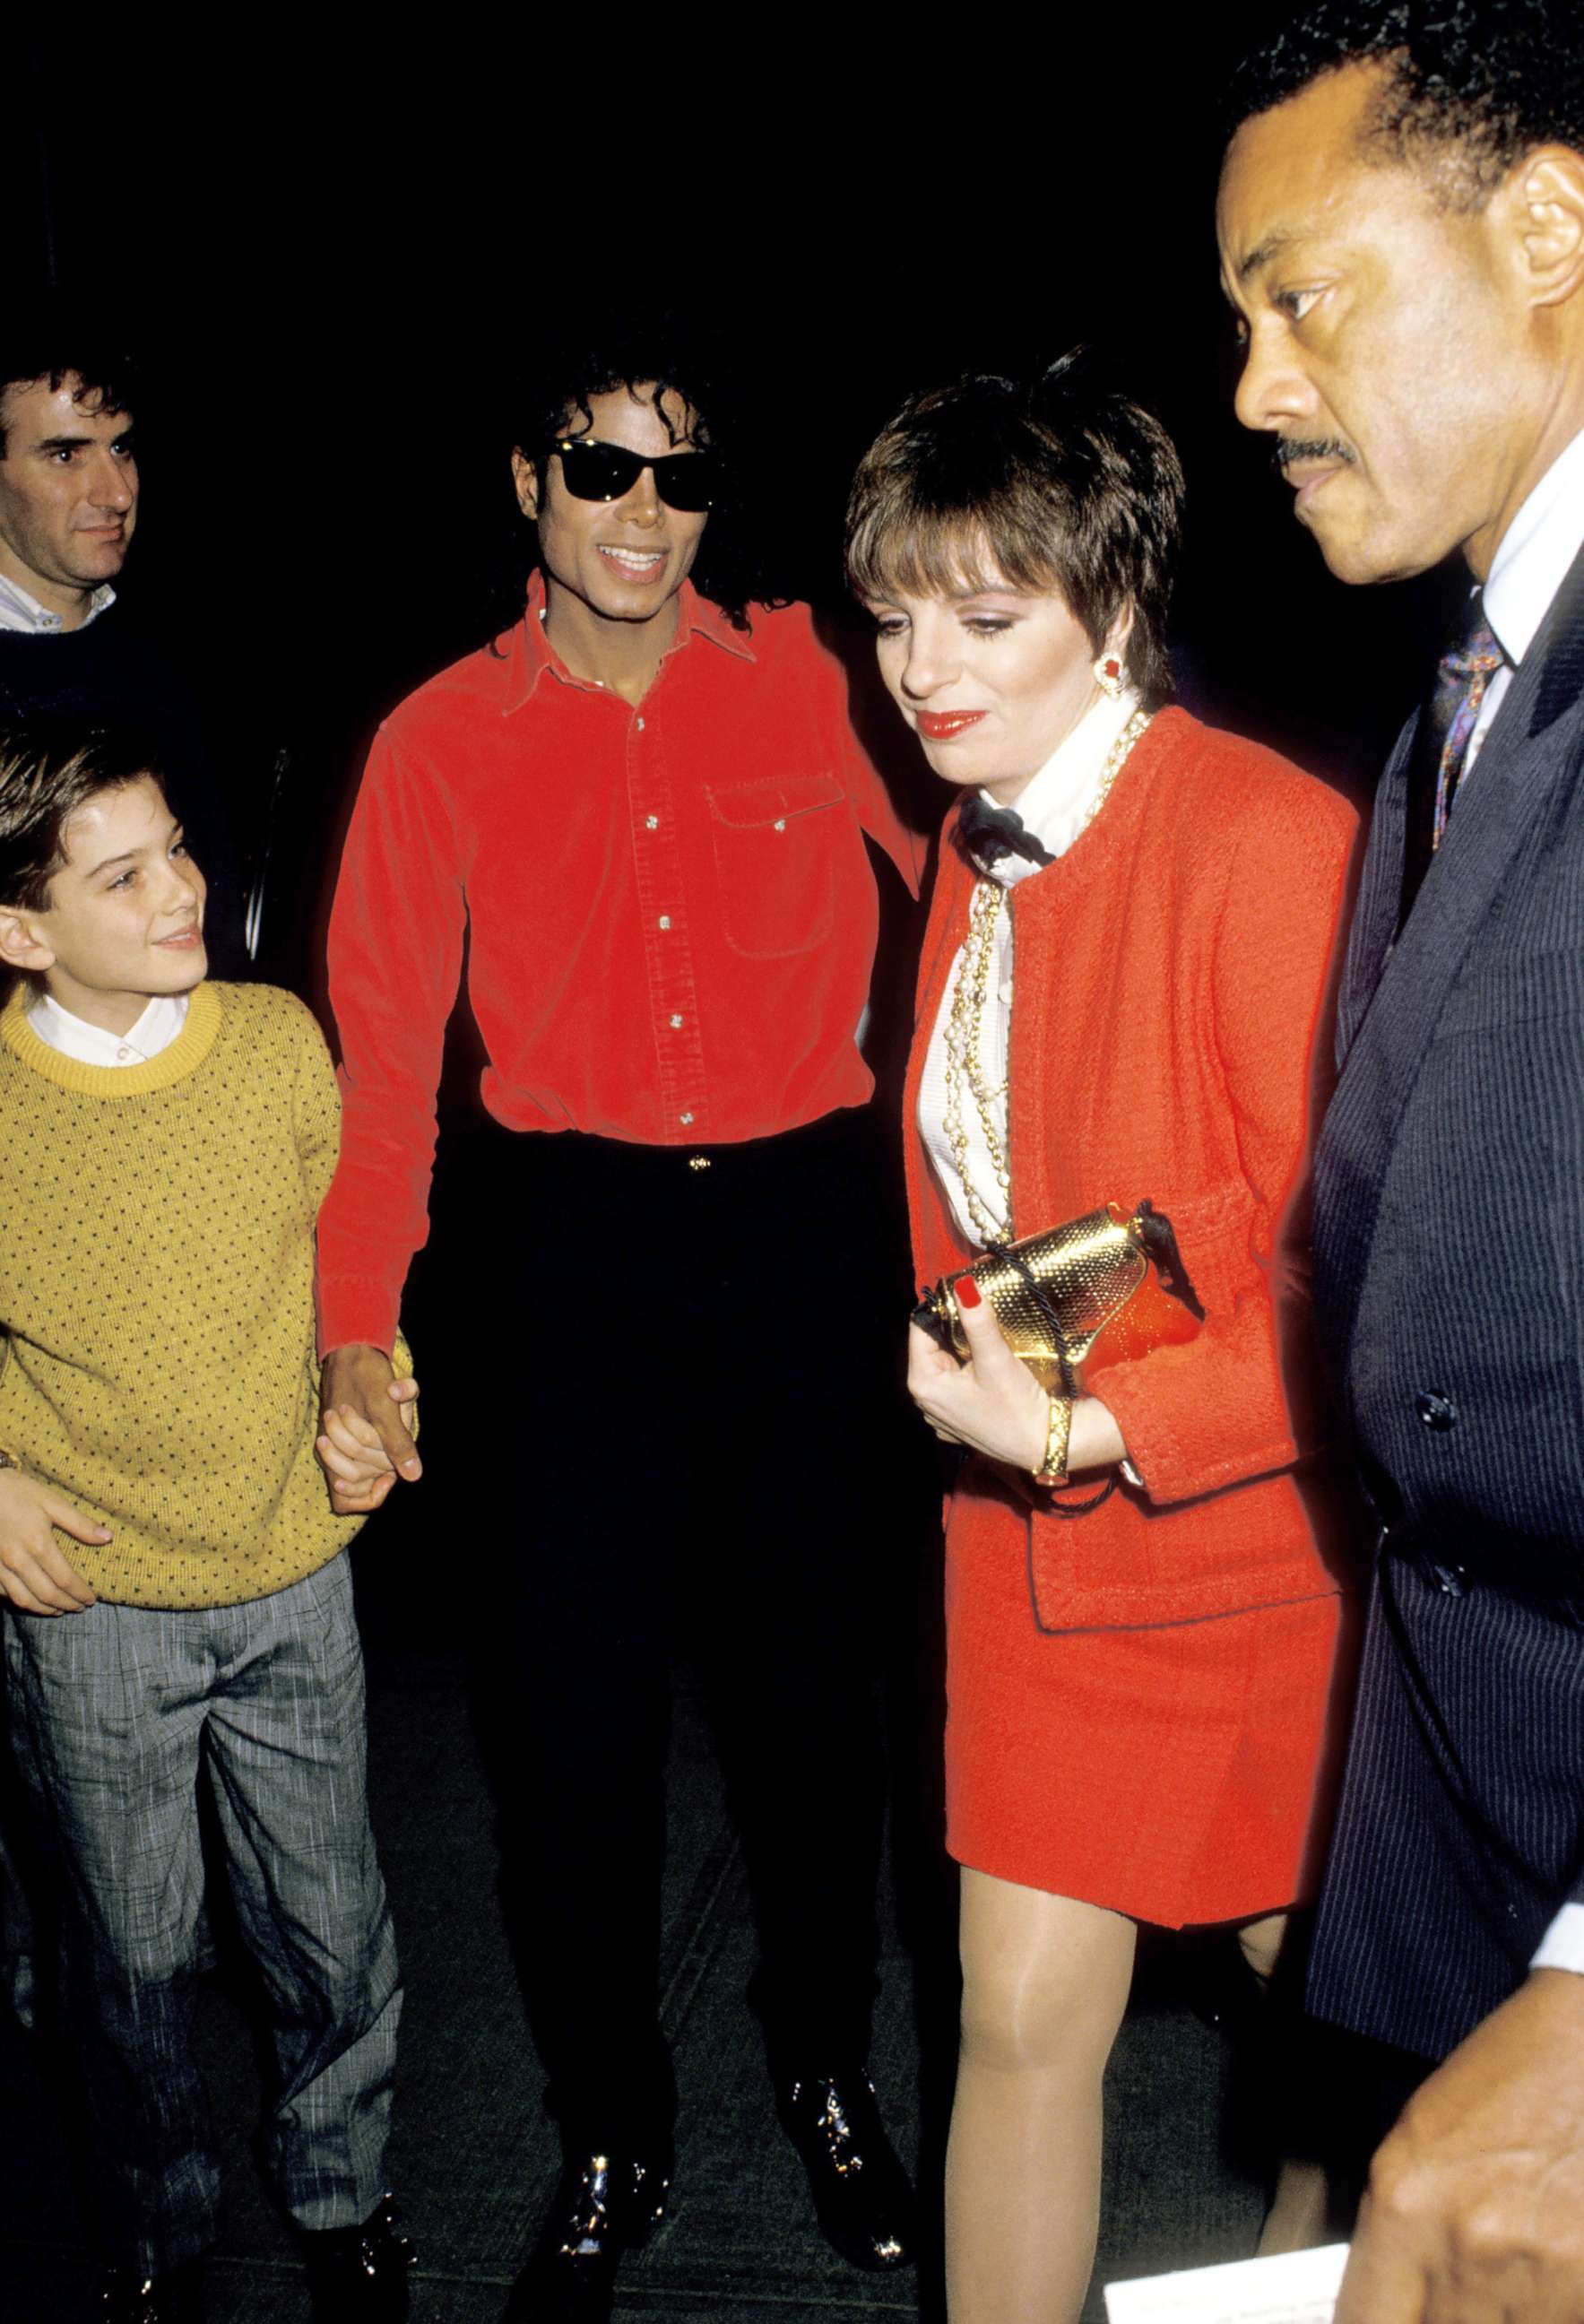 PHOTO: Jimmy Safechuck, Michael Jackson and Liza Minnelli attend an event in 1988.